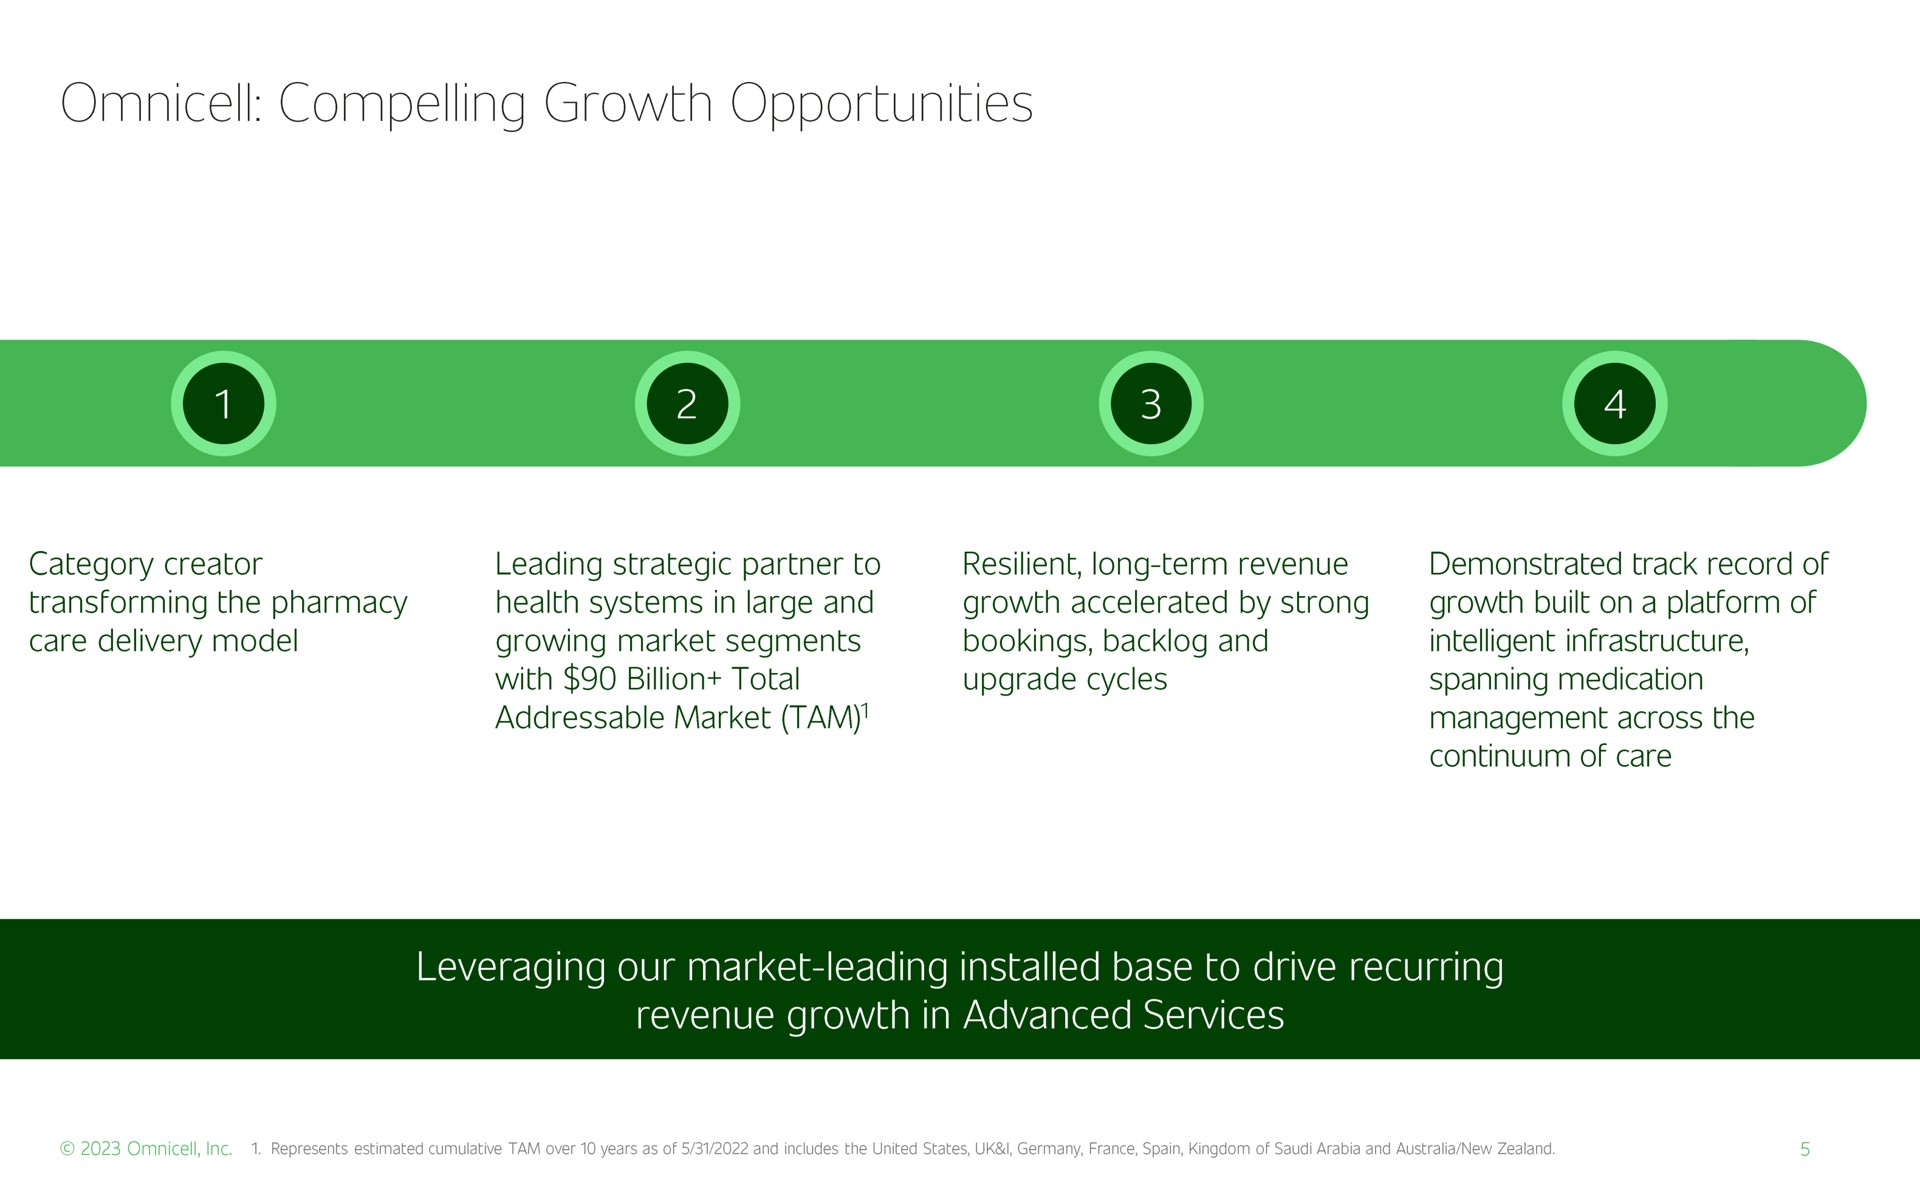 compelling growth opportunities leveraging our market leading base to drive recurring revenue growth in advanced services | Omnicell